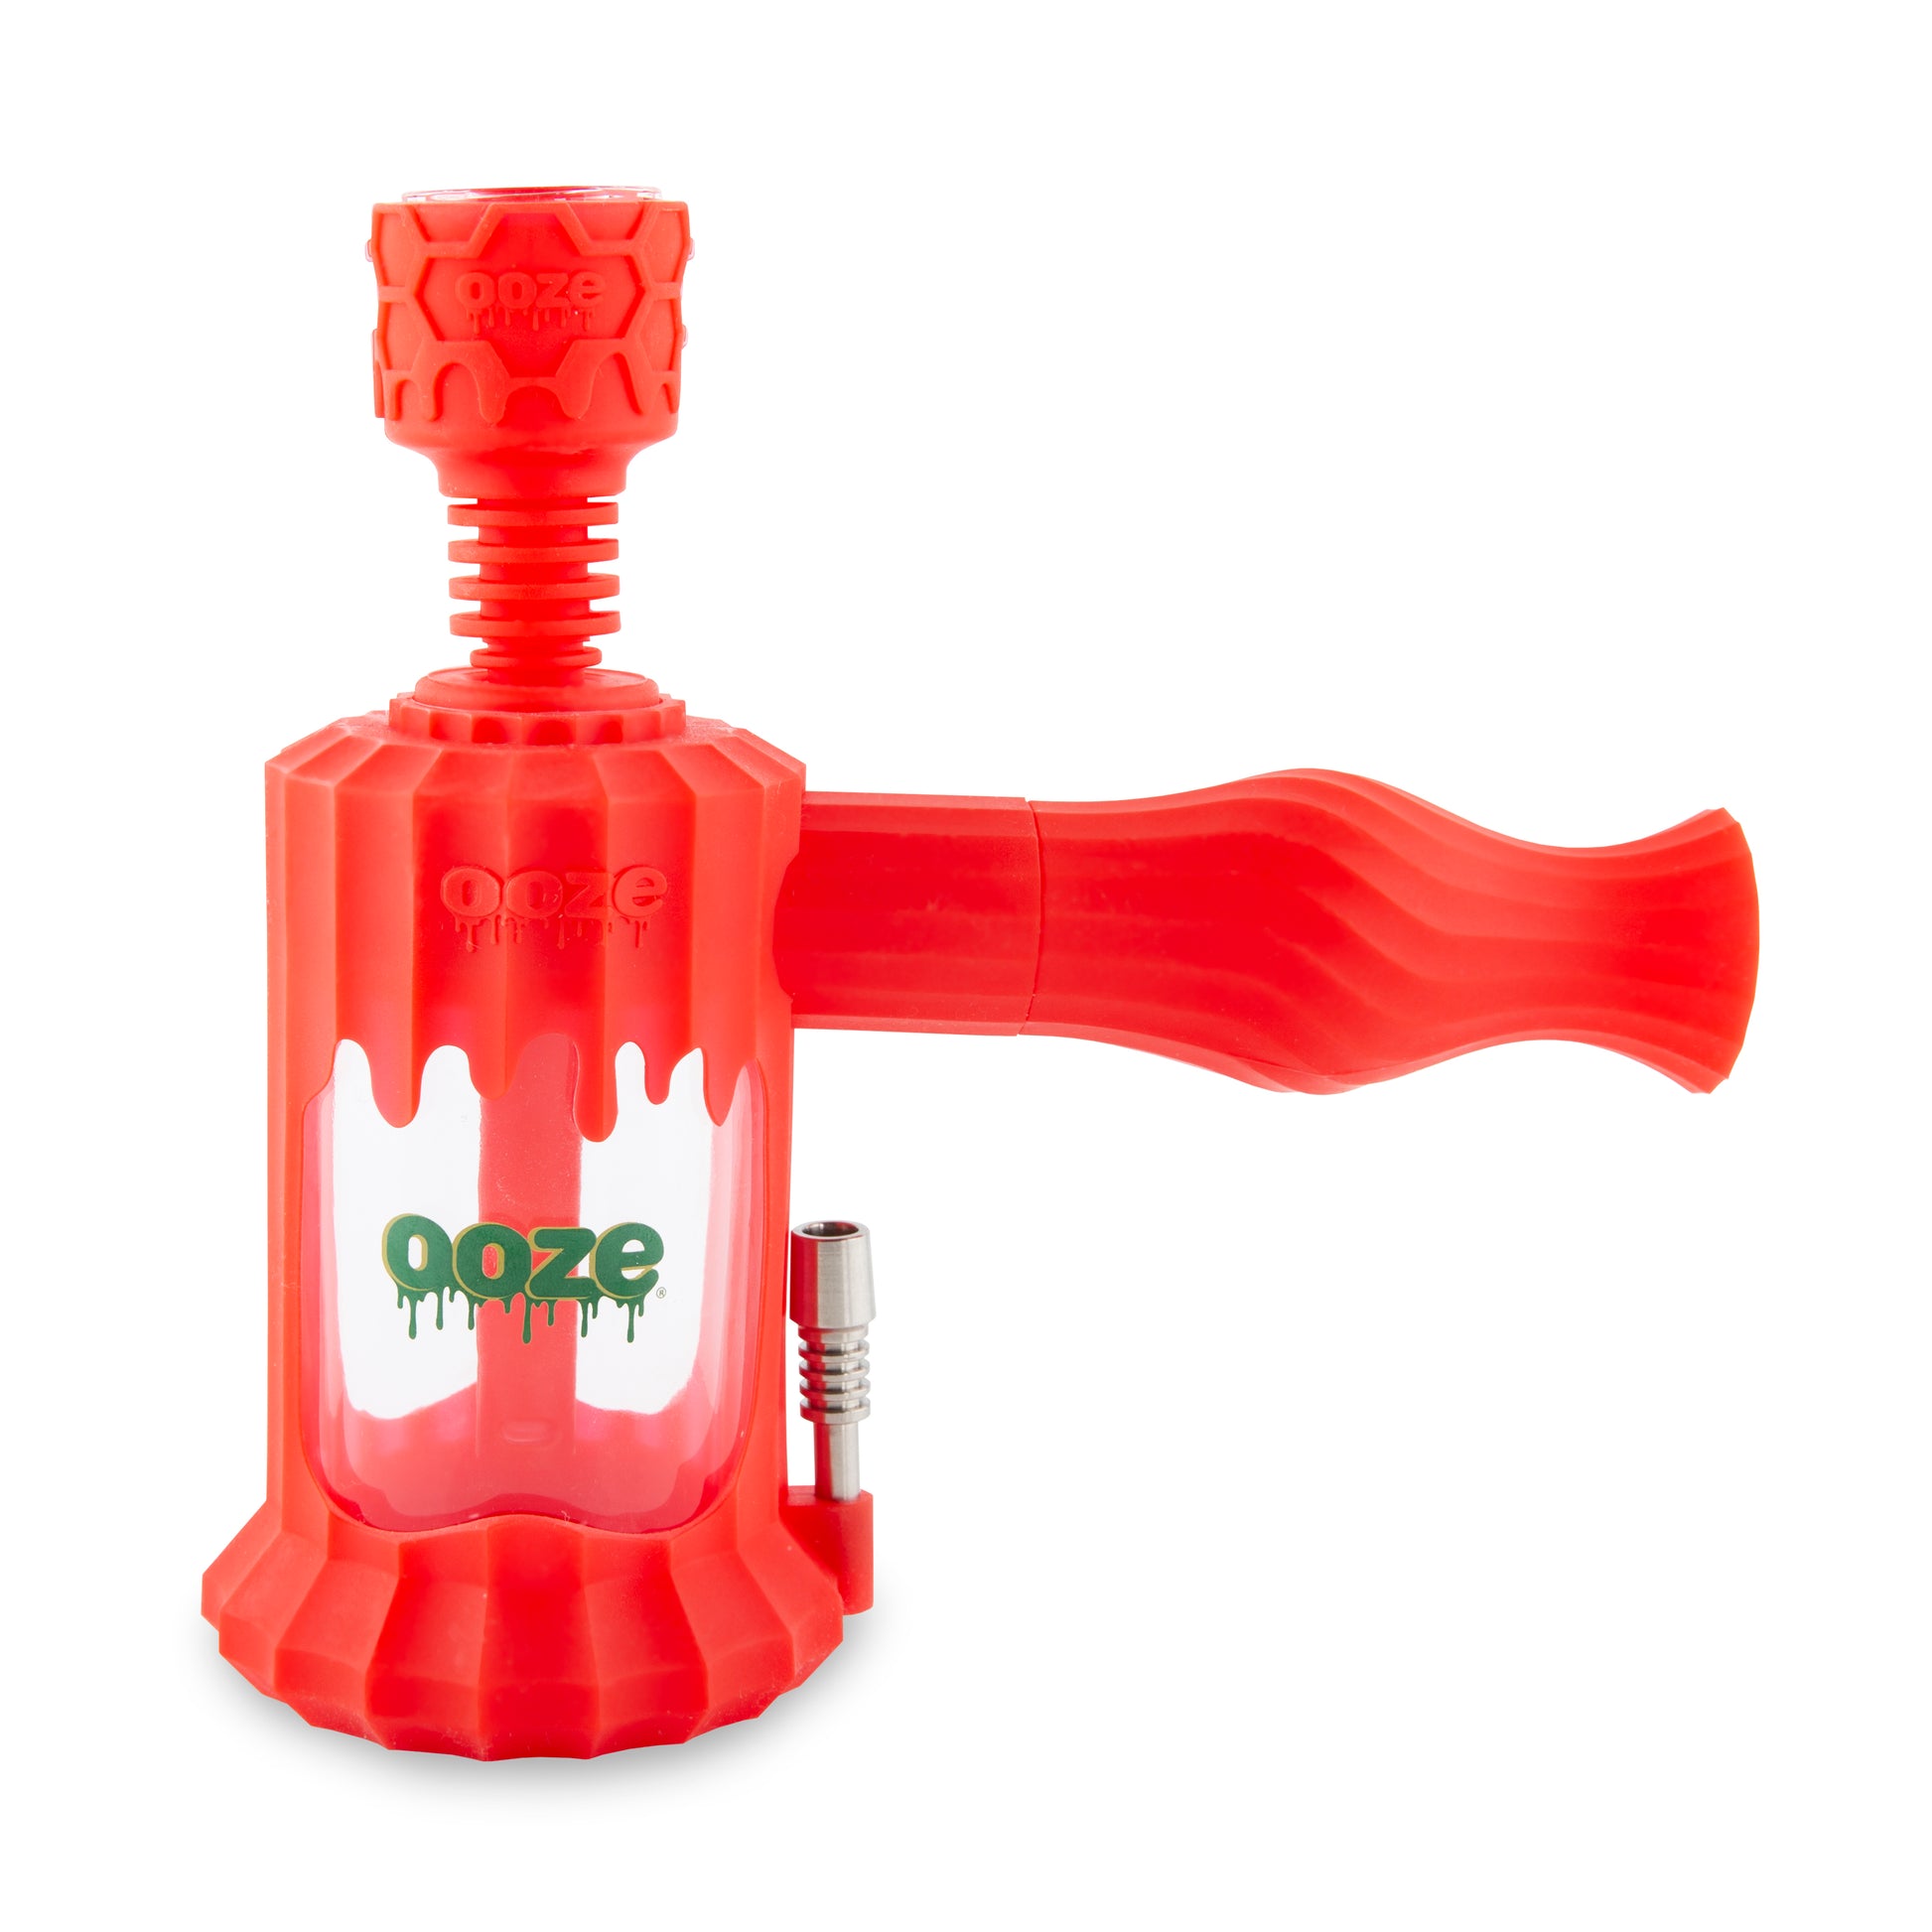 6 Hammer Silicone Glass Bong and Nectar Collector 